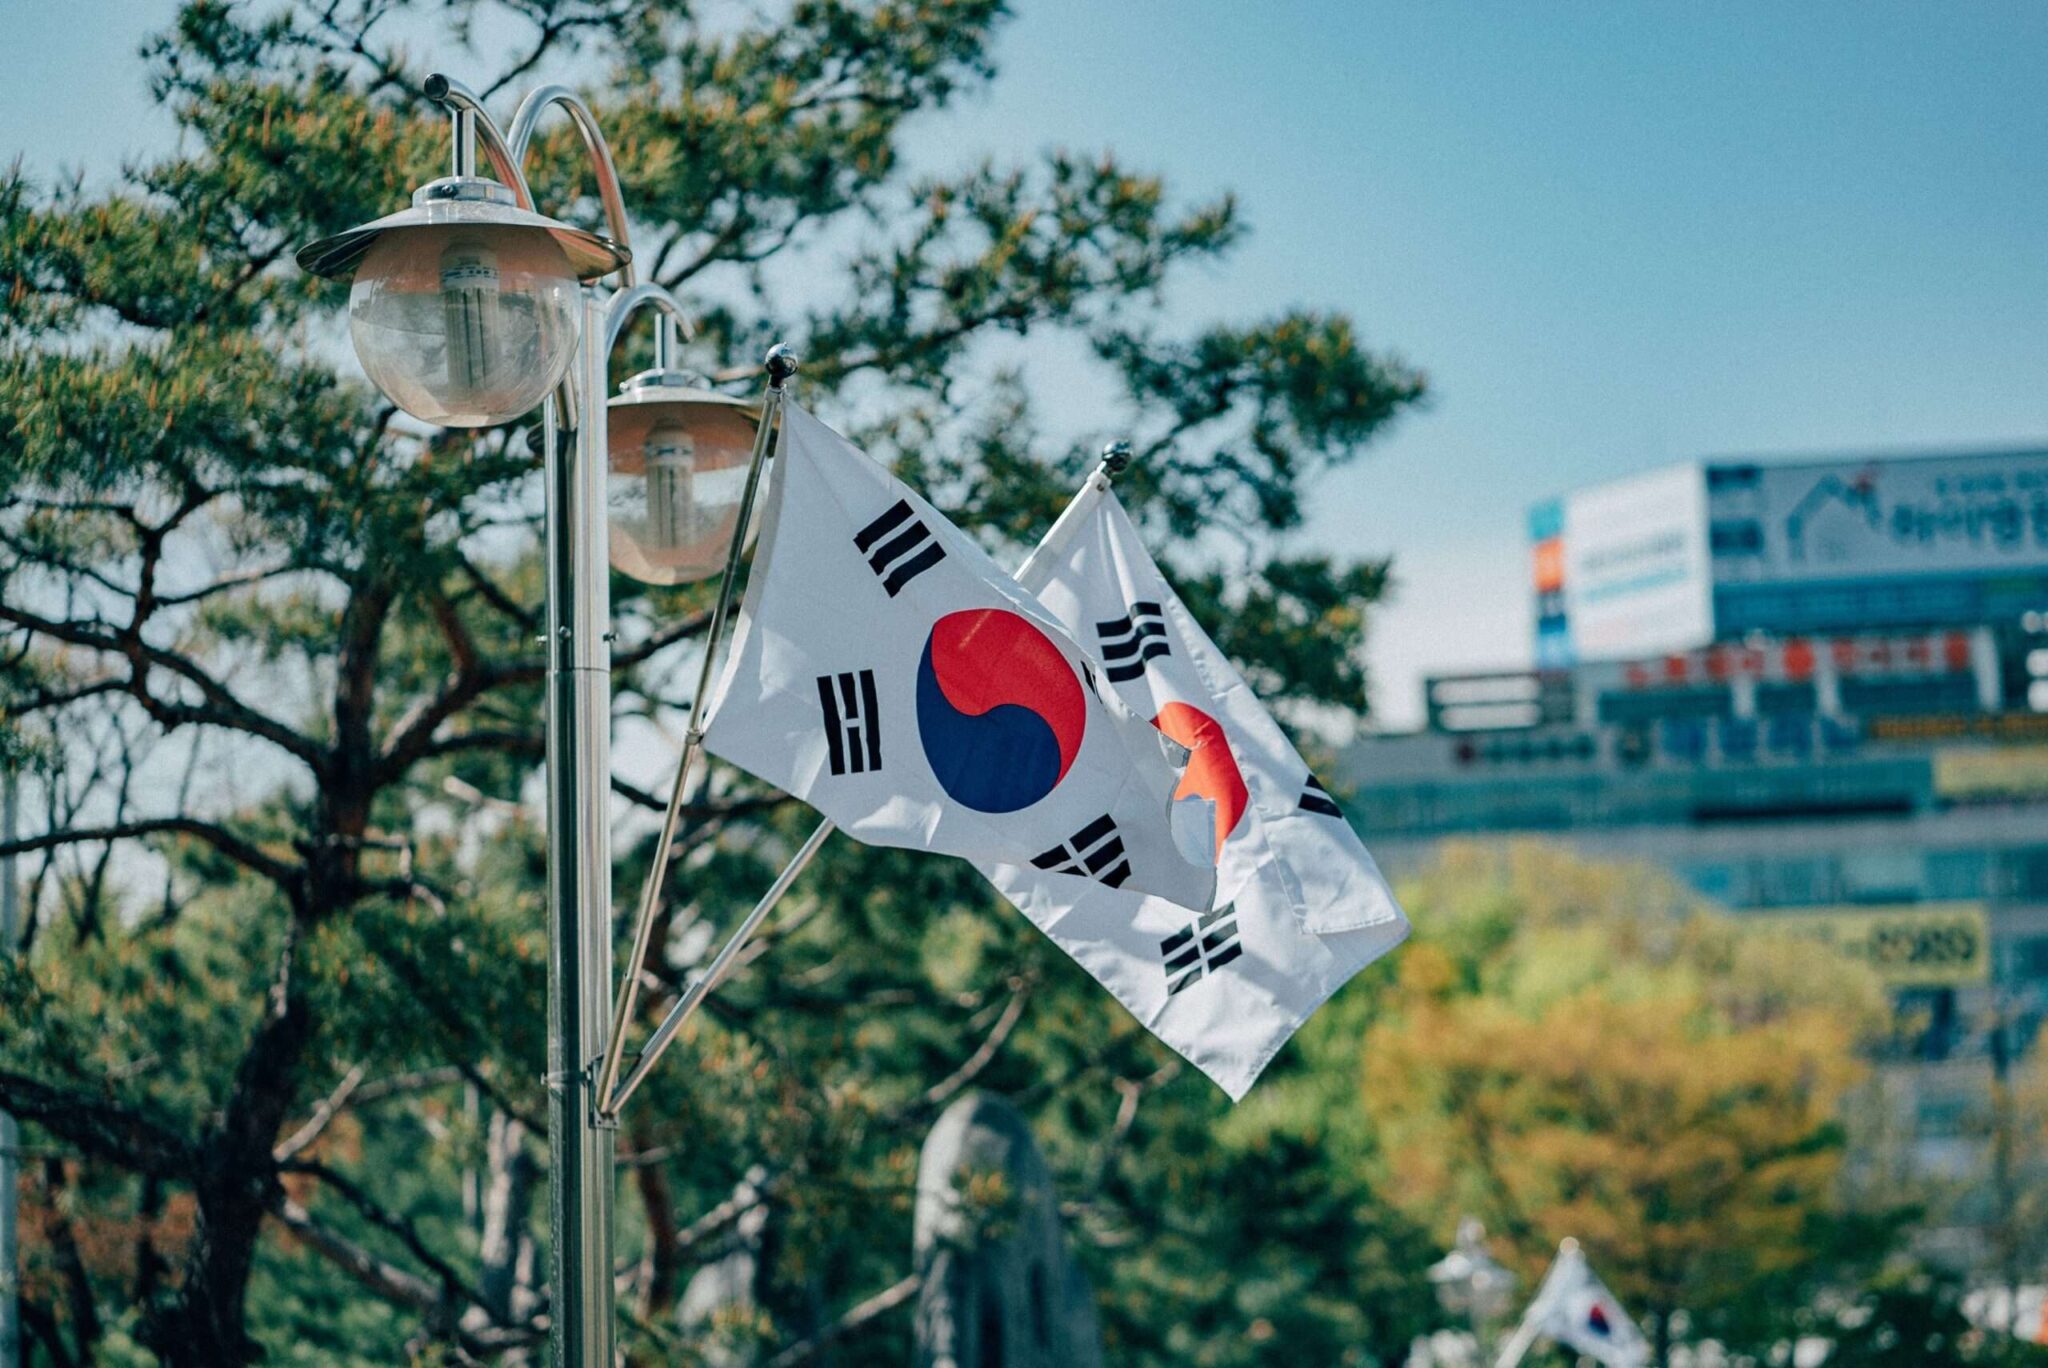 South Korean flag to represent the Kim Nam-guk Prevention Law passed in the country